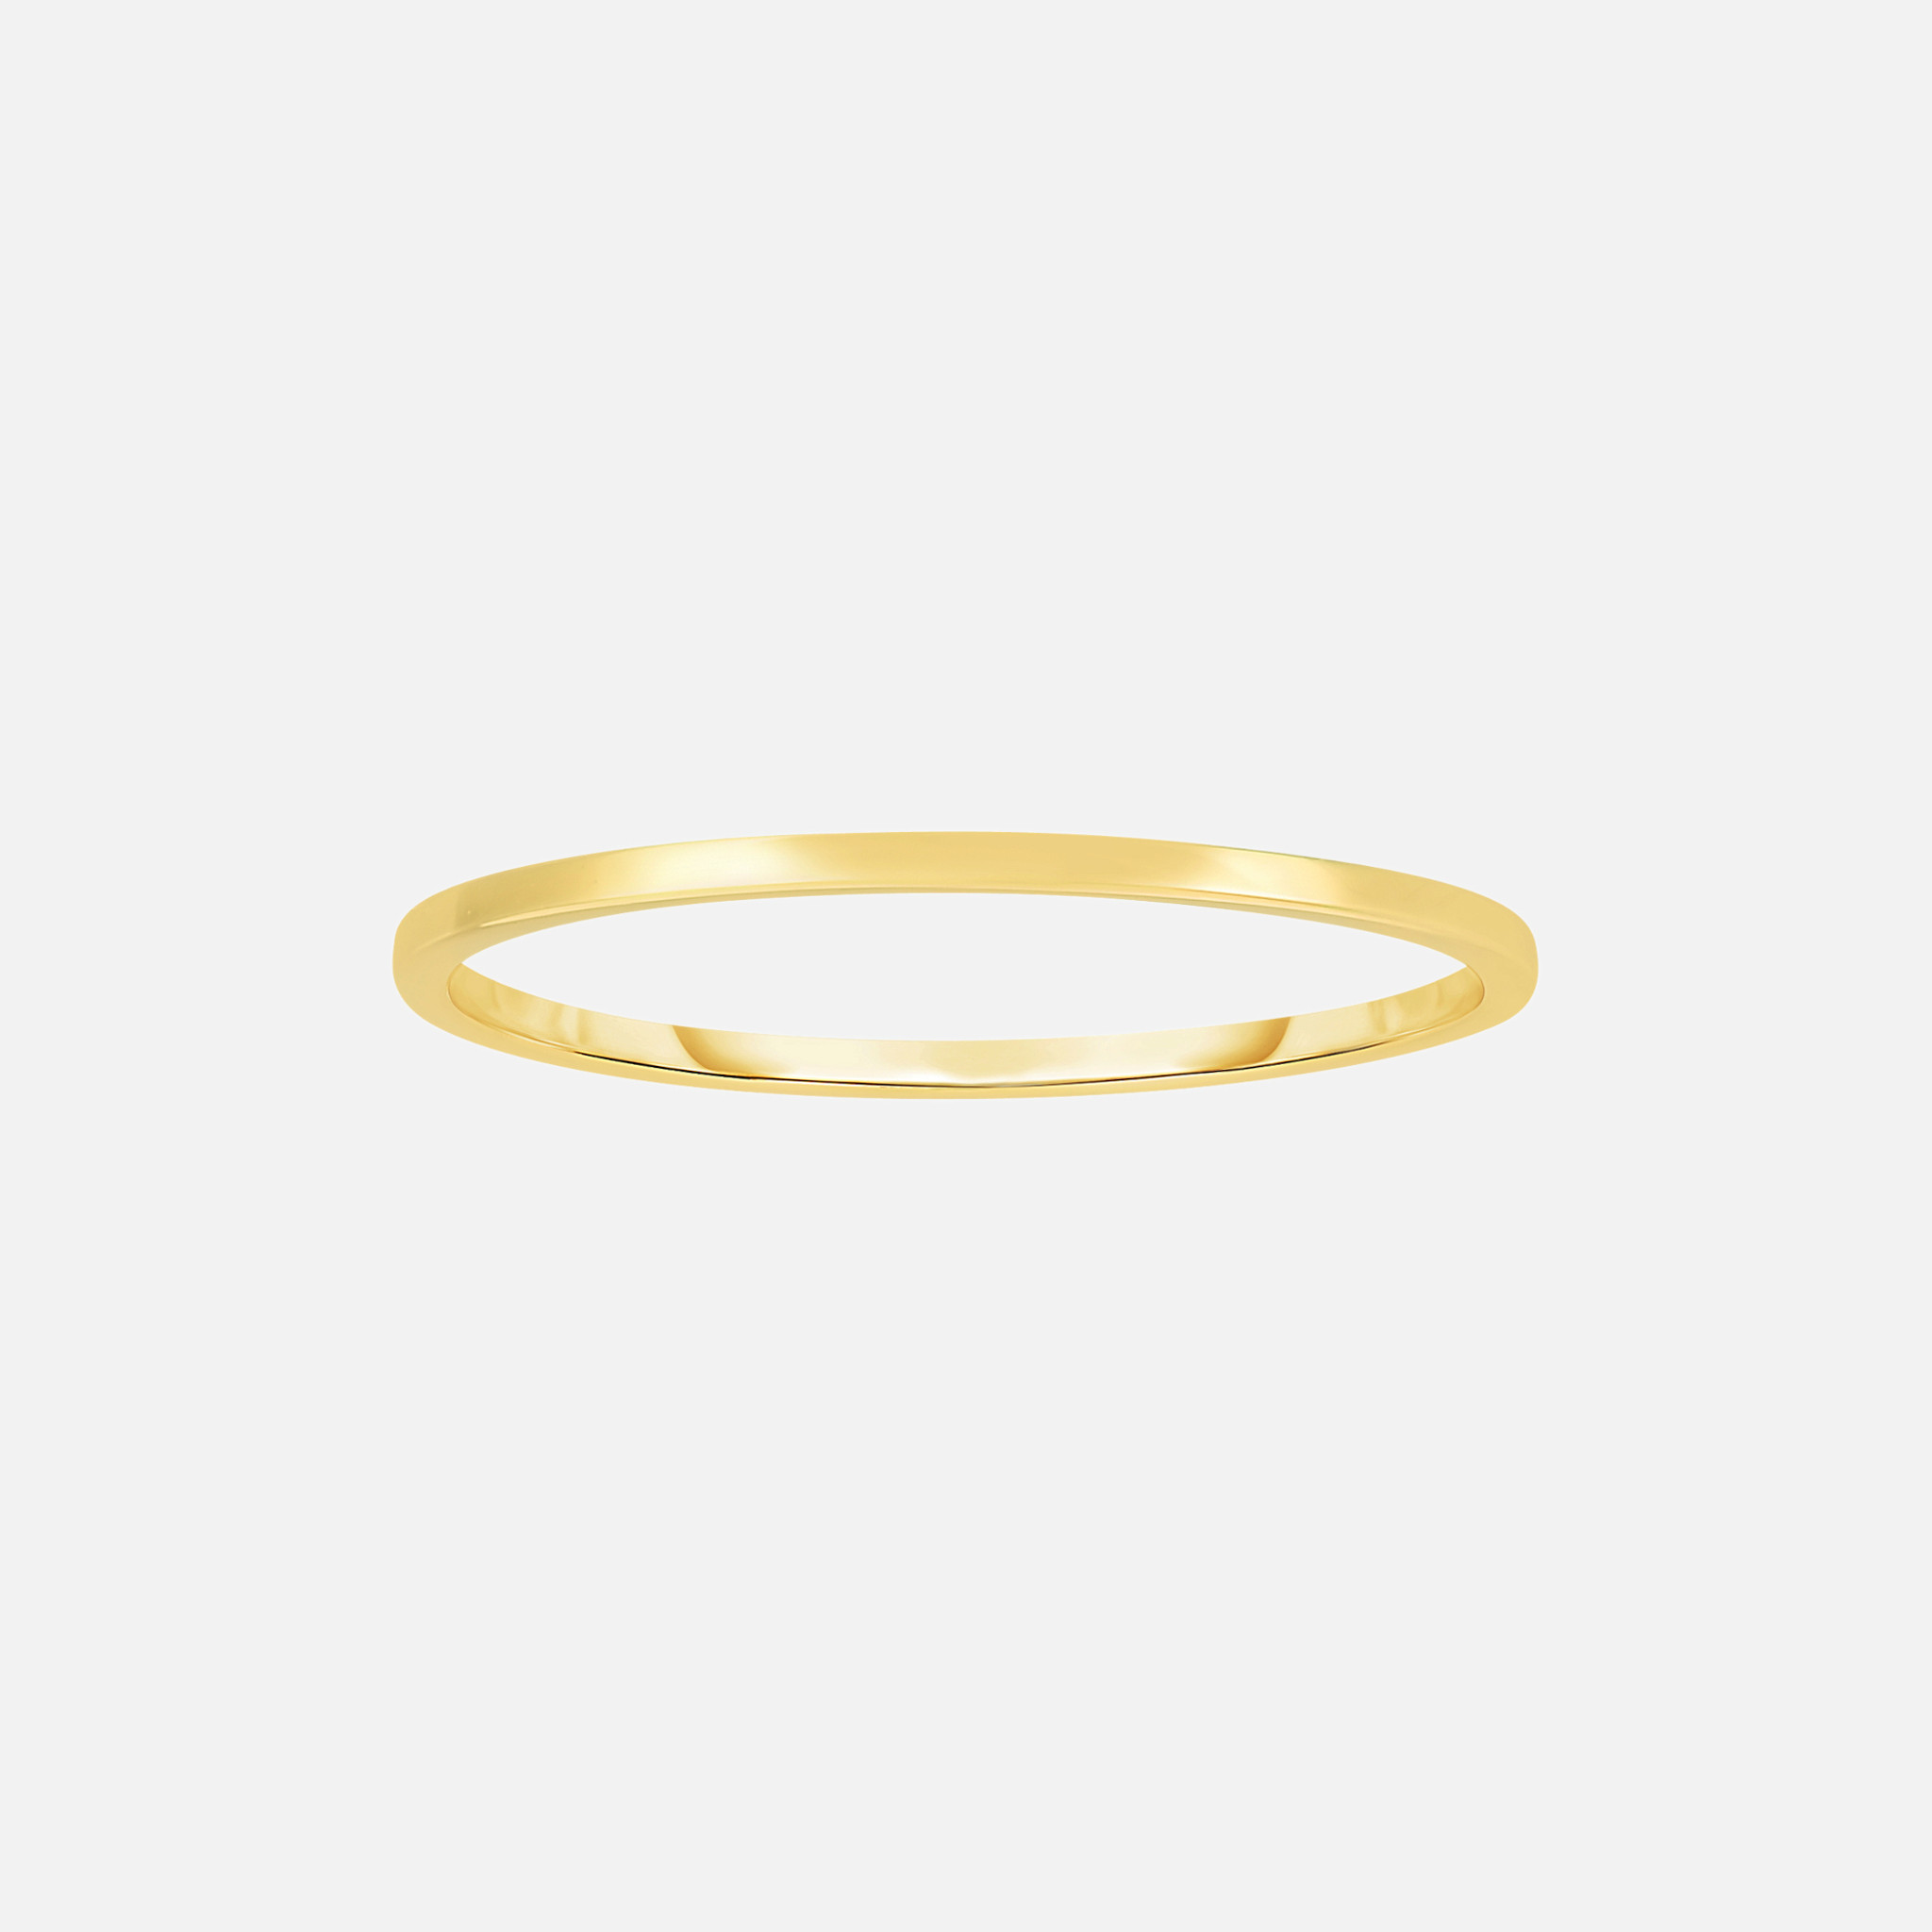 A solid essential, this thin gold band ring is crafted in 14k.